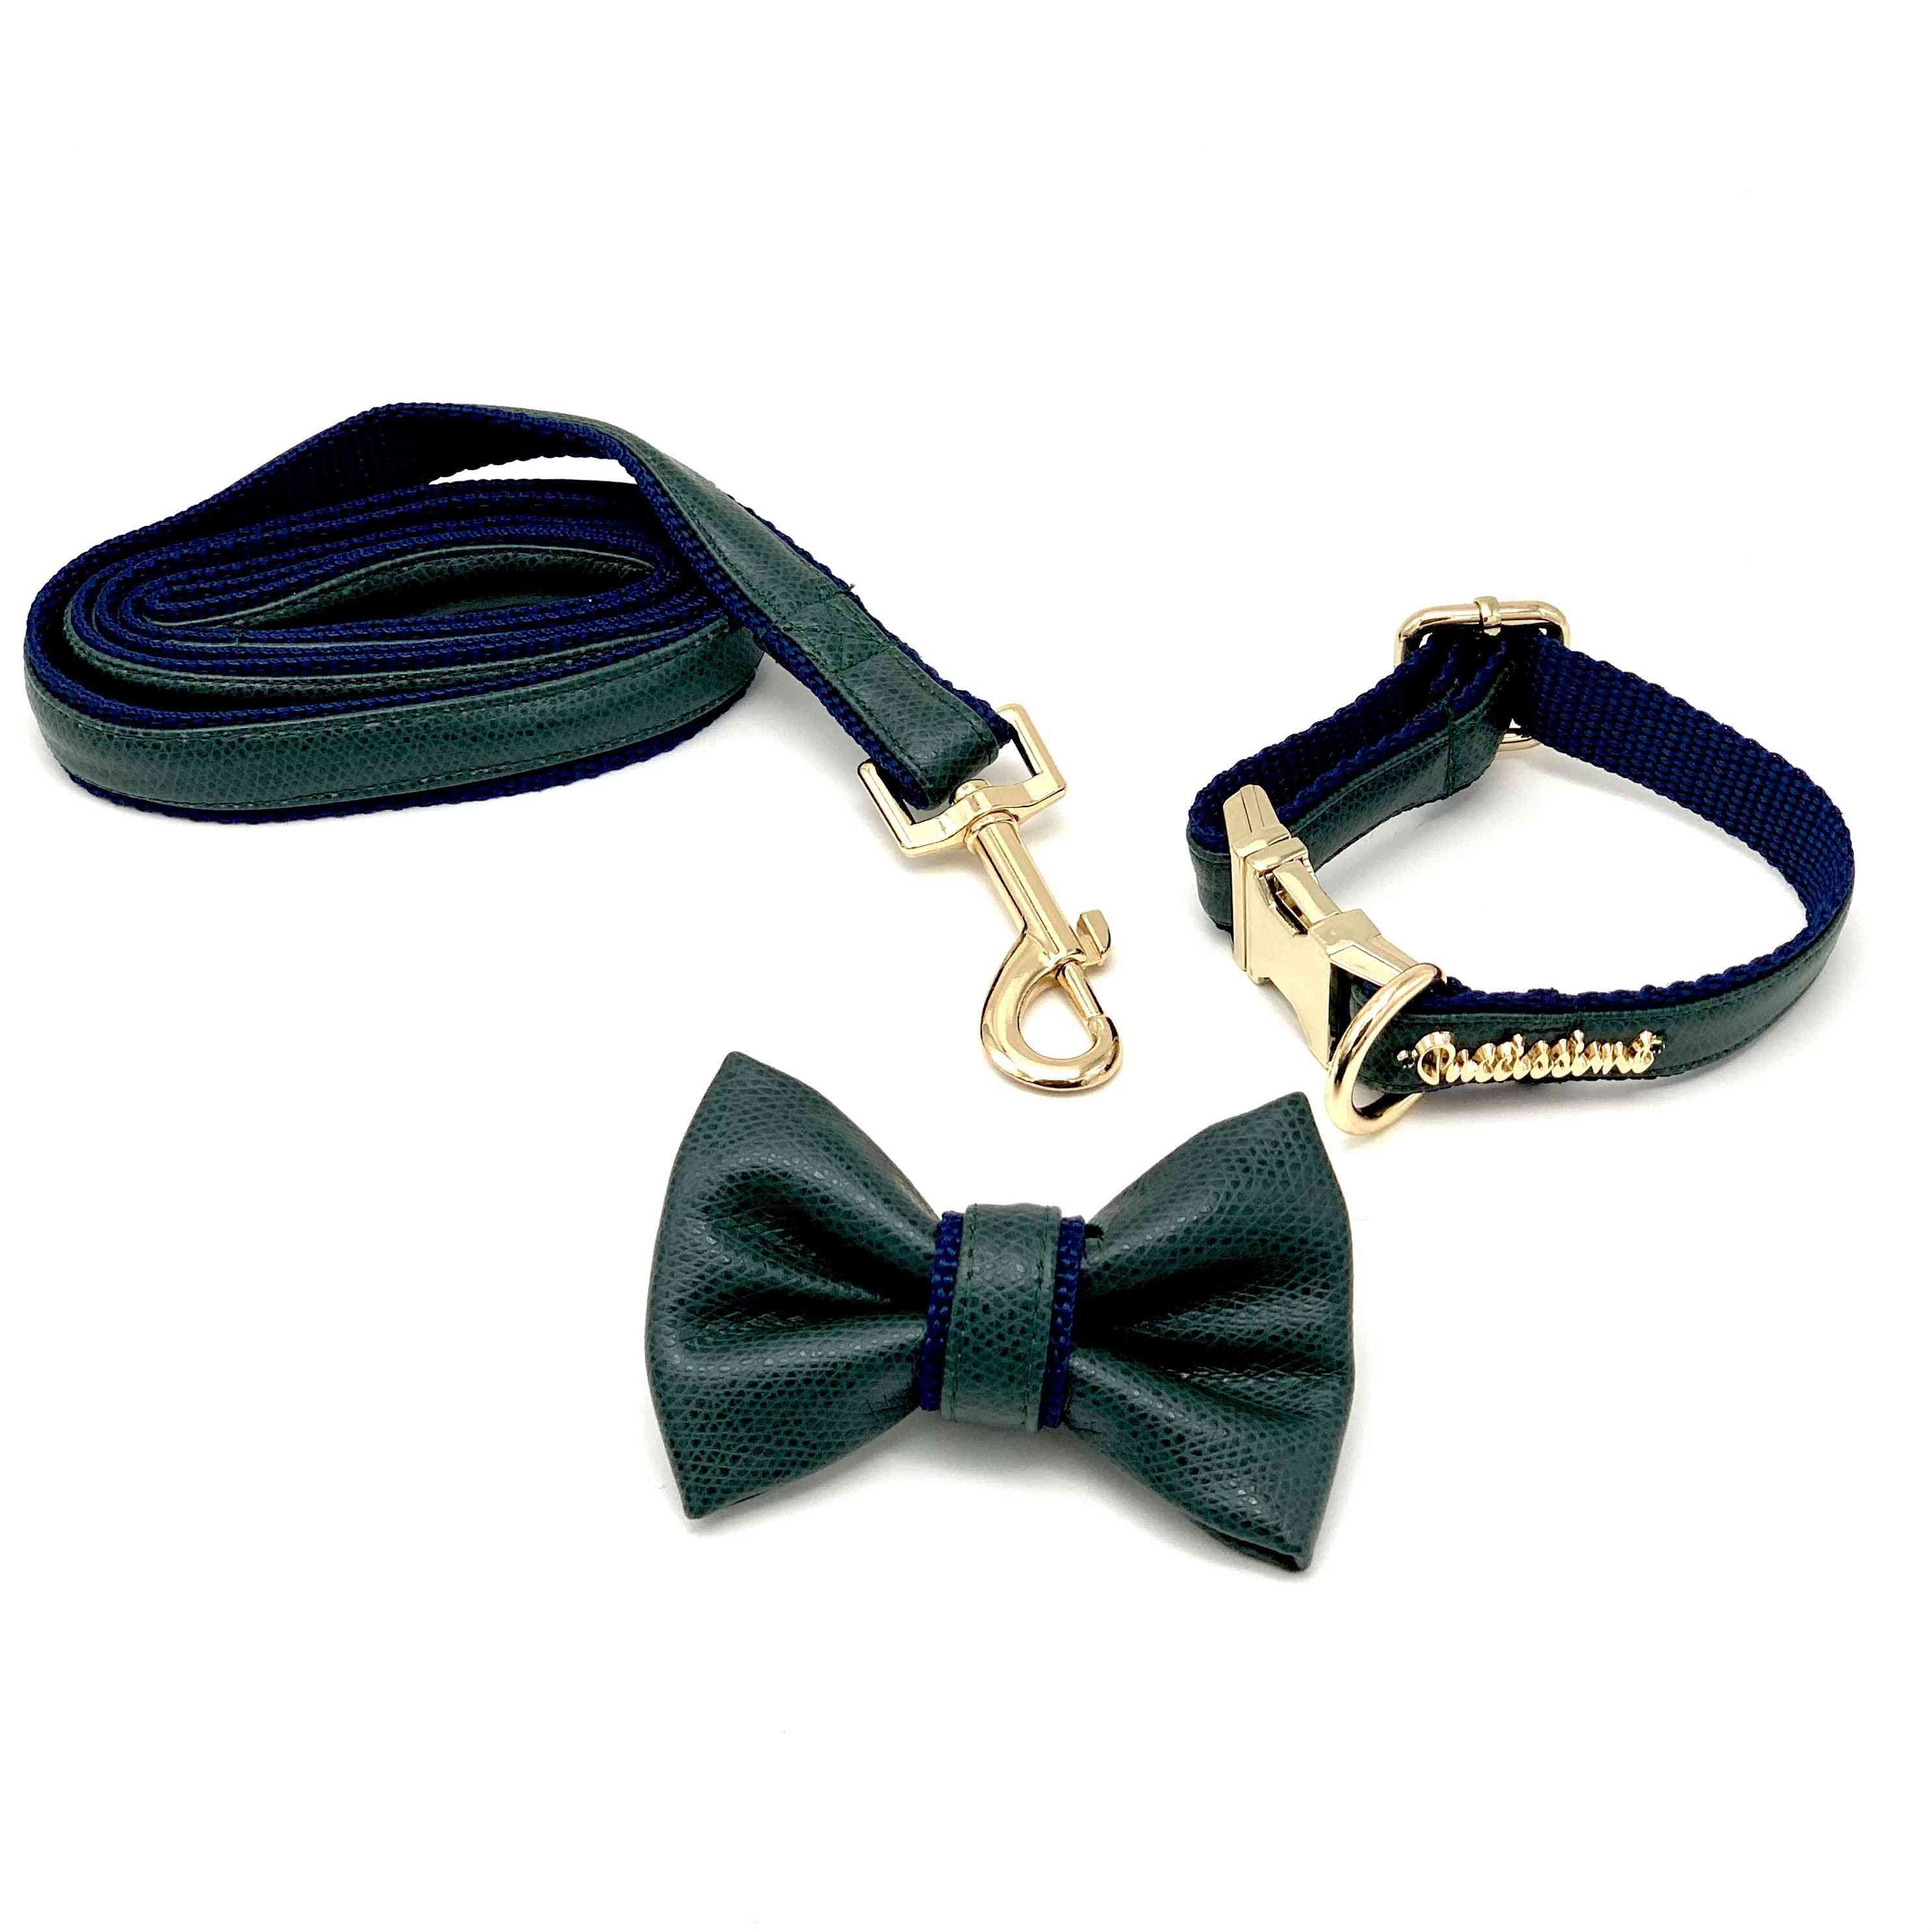 Leather Pet Collars & Harnesses